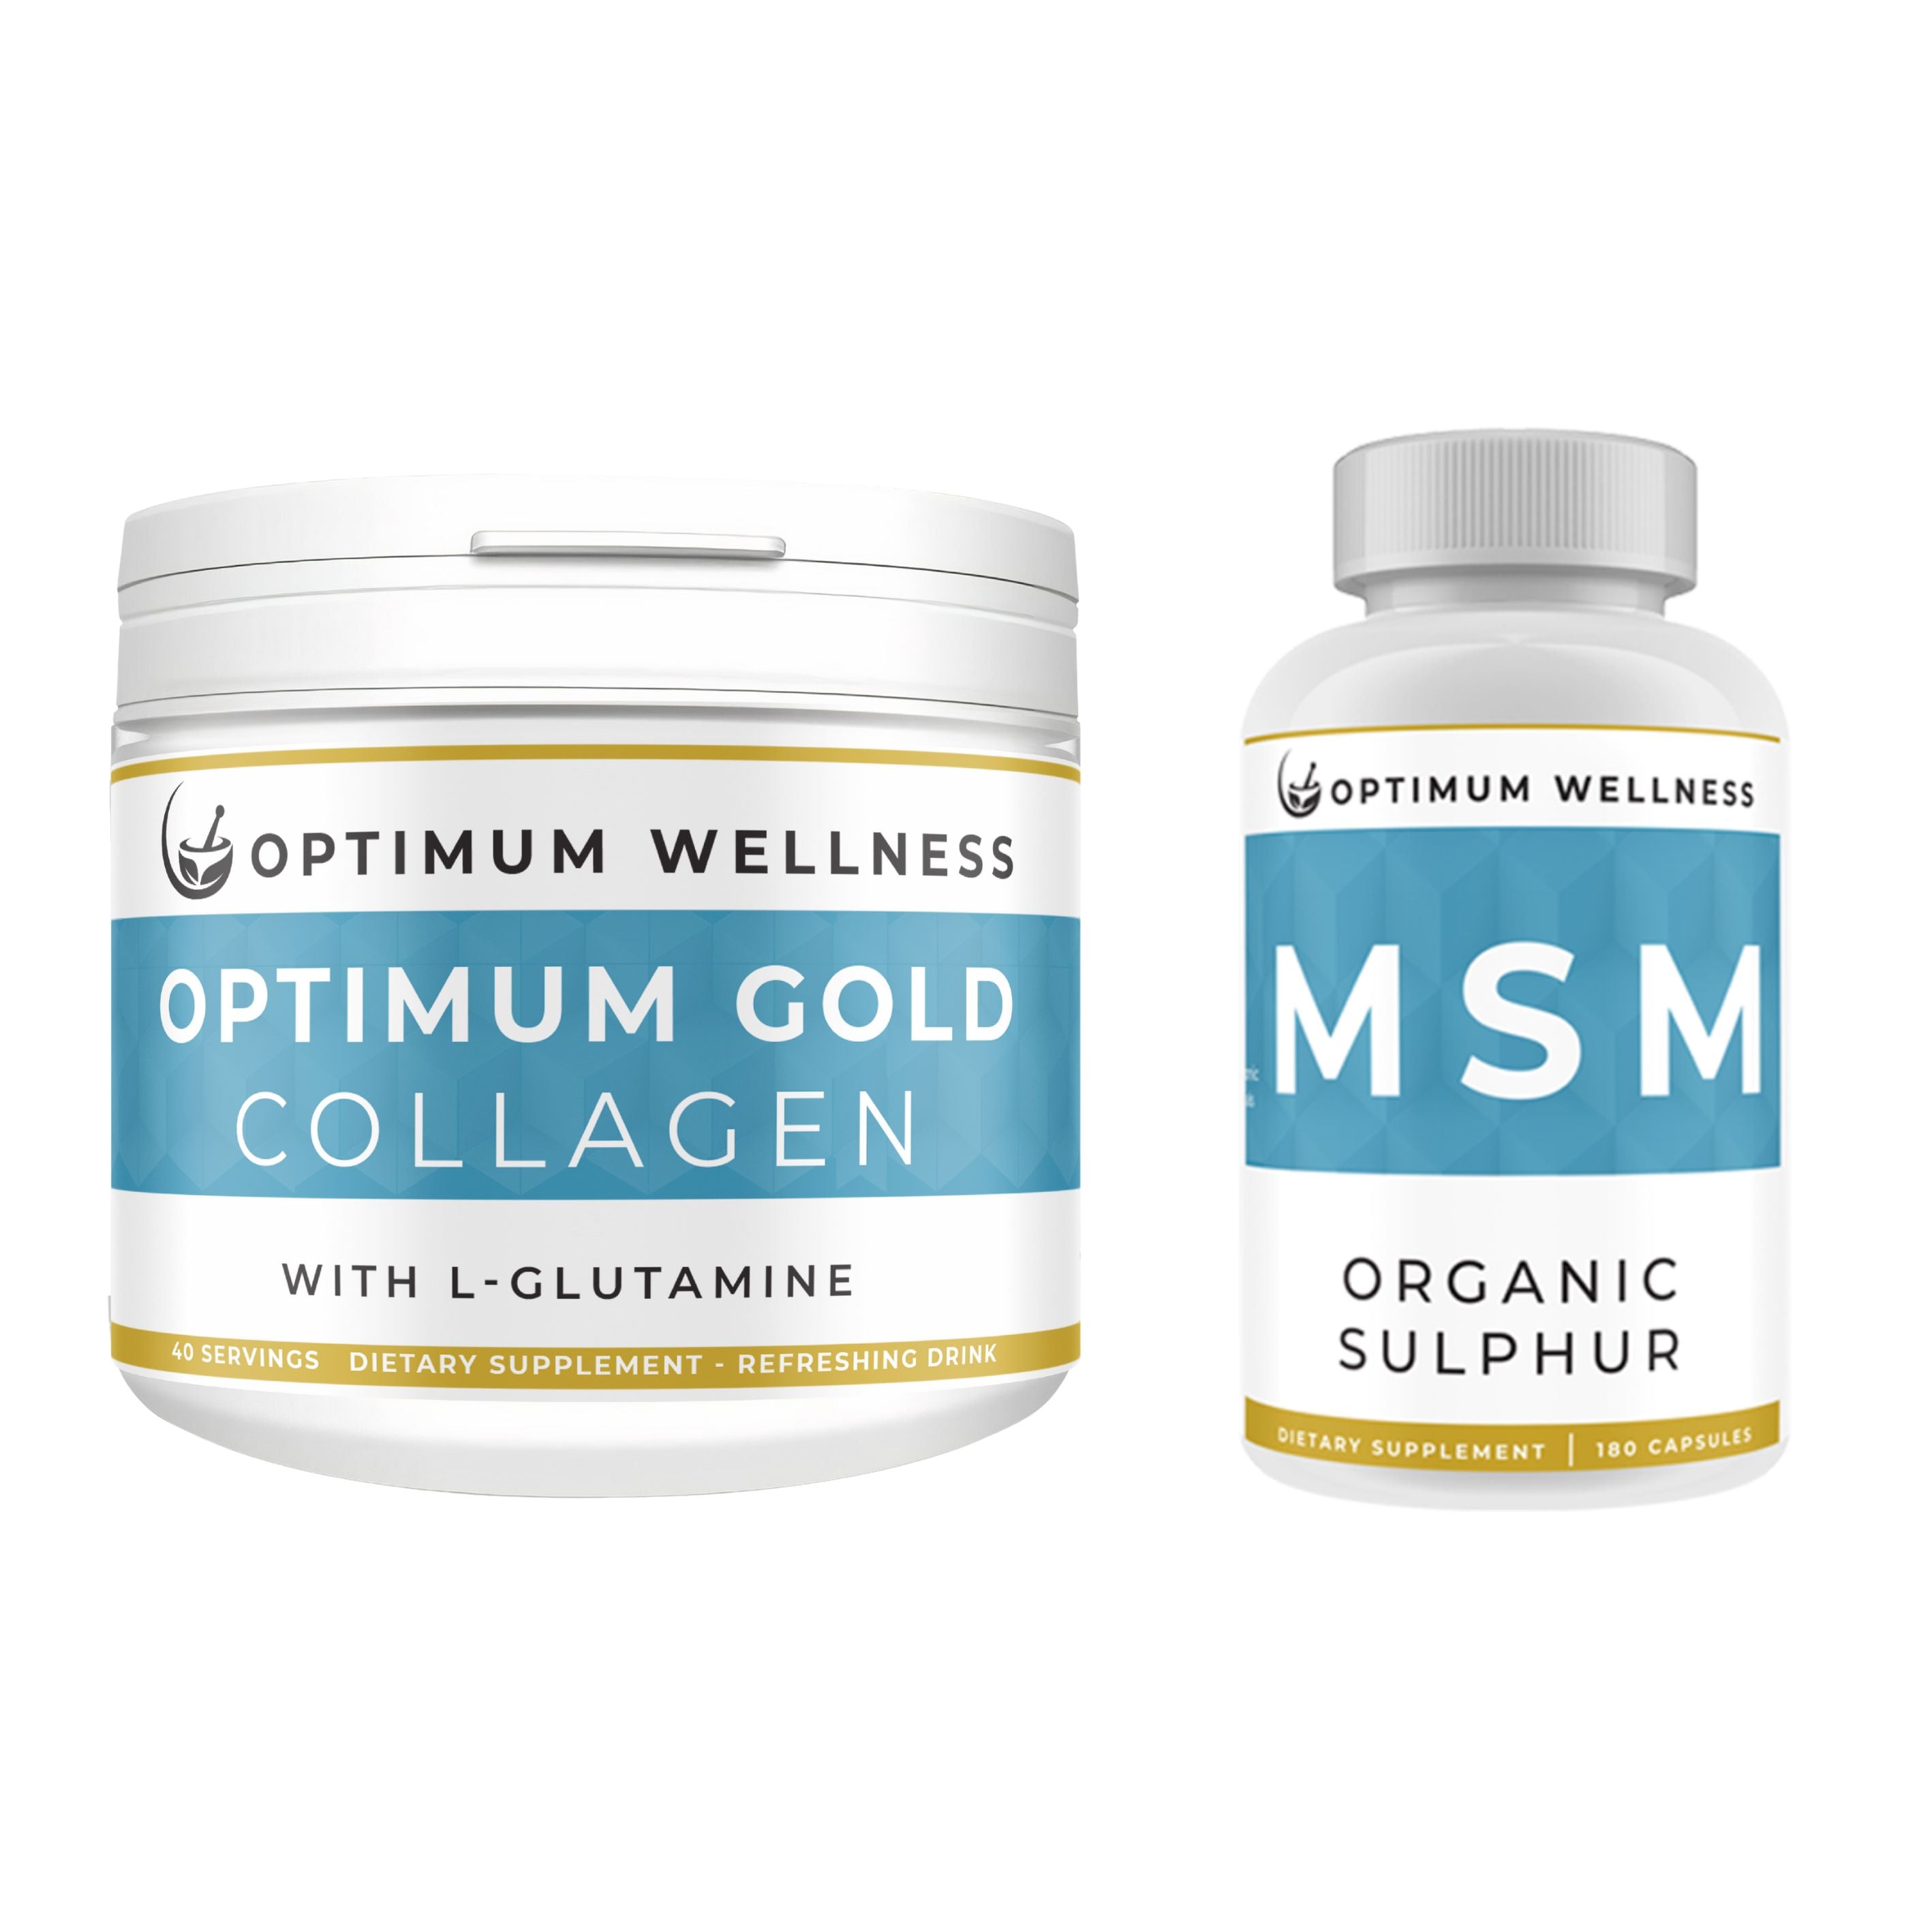 improve the amount of elasticity in your skin and reduce joint pain. In addition, the Gold MSM helps to manage pain, reduce inflammation, and increase mobility.